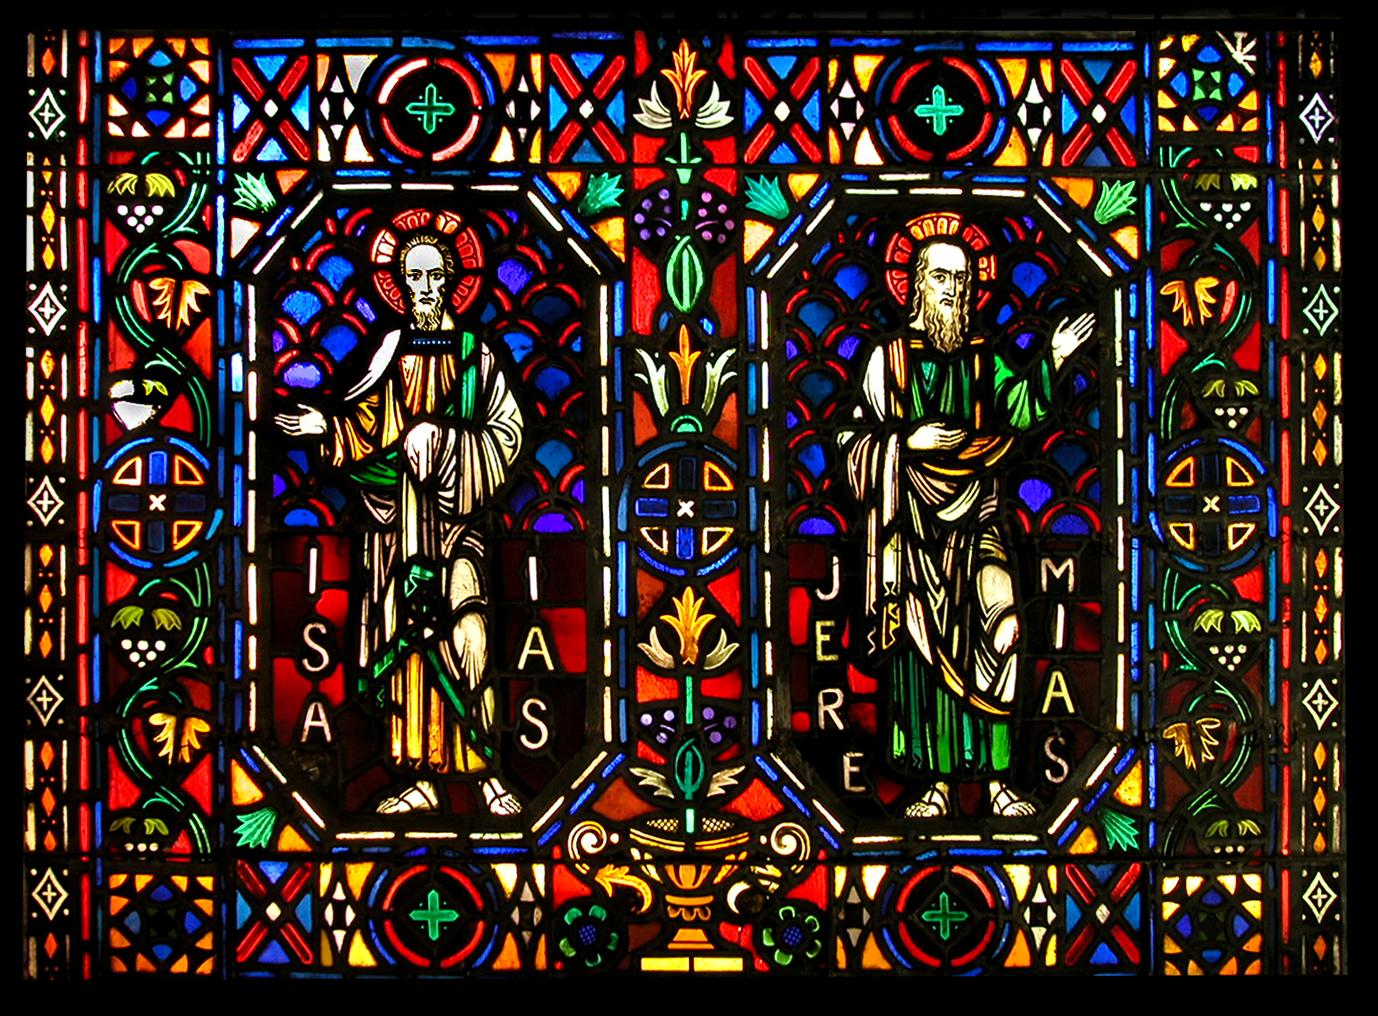 450x390px 164.13 KB Stained Glass